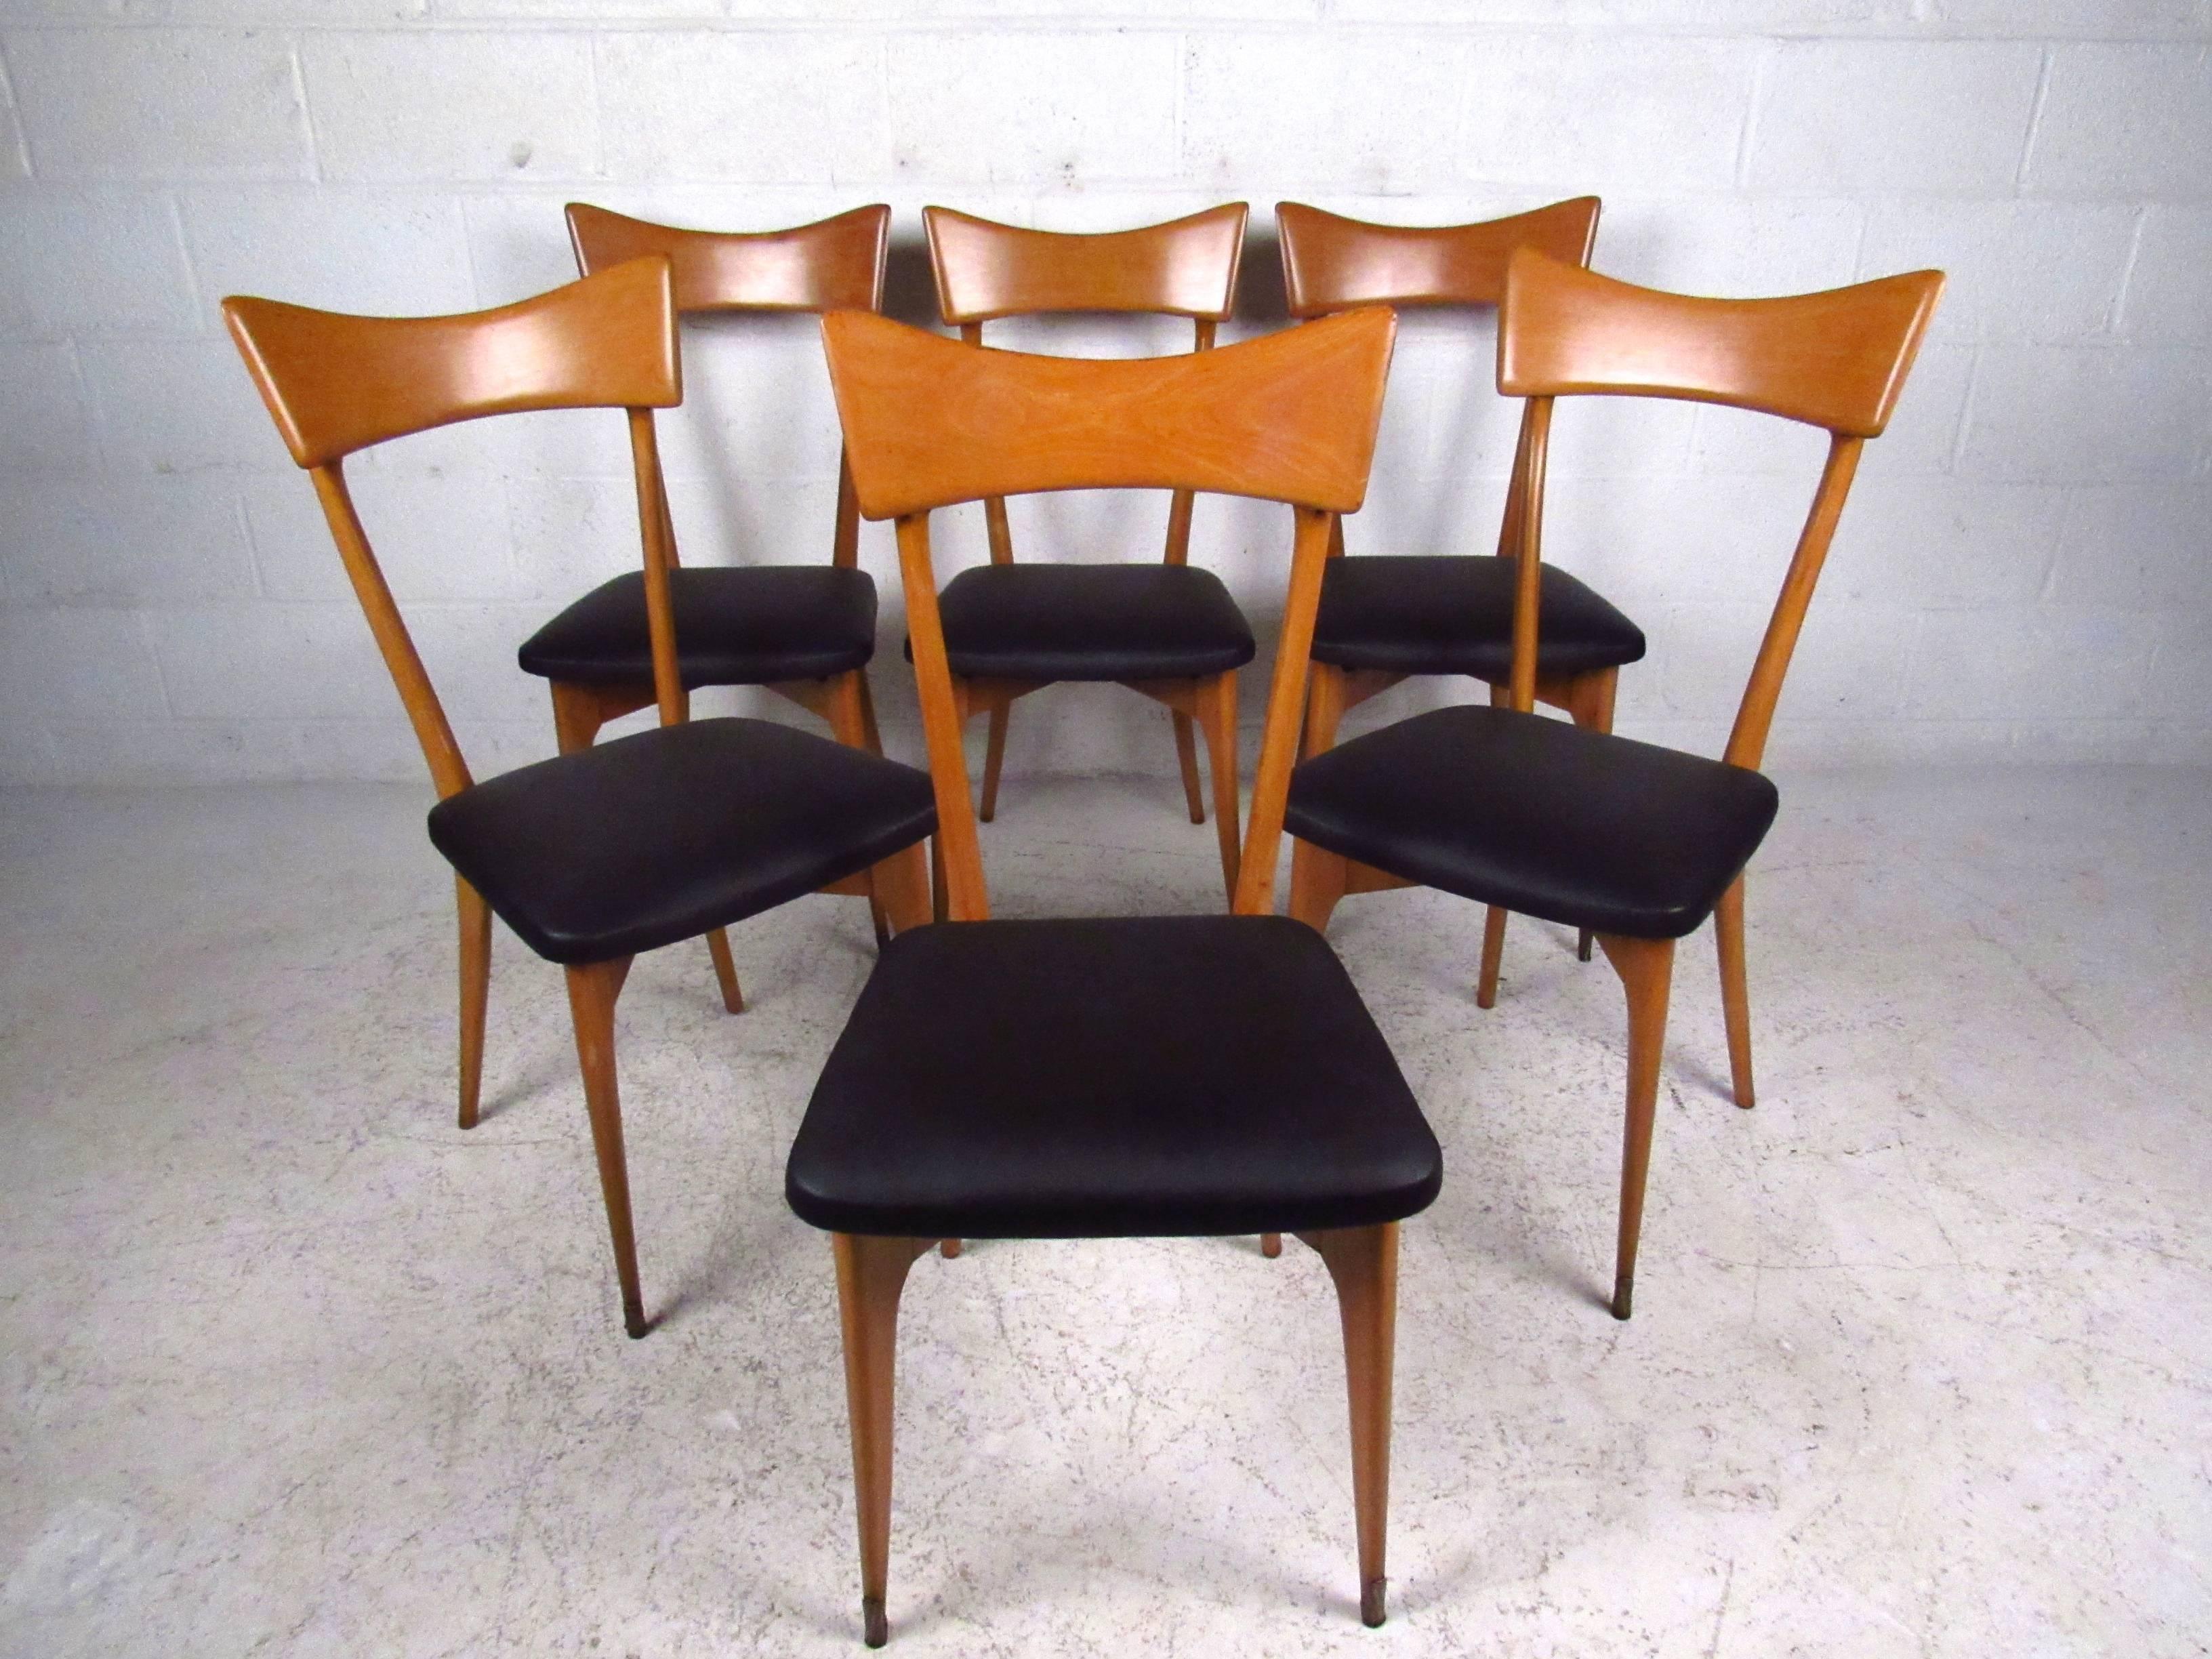 This beautiful set of six vintage Italian dining chairs feature the beautiful design of Ico Parisi. Gorgeous sculpted seat backs, tapered legs, brass foot guards (front legs) and newly reupholstered seats make these a unique addition to any dining